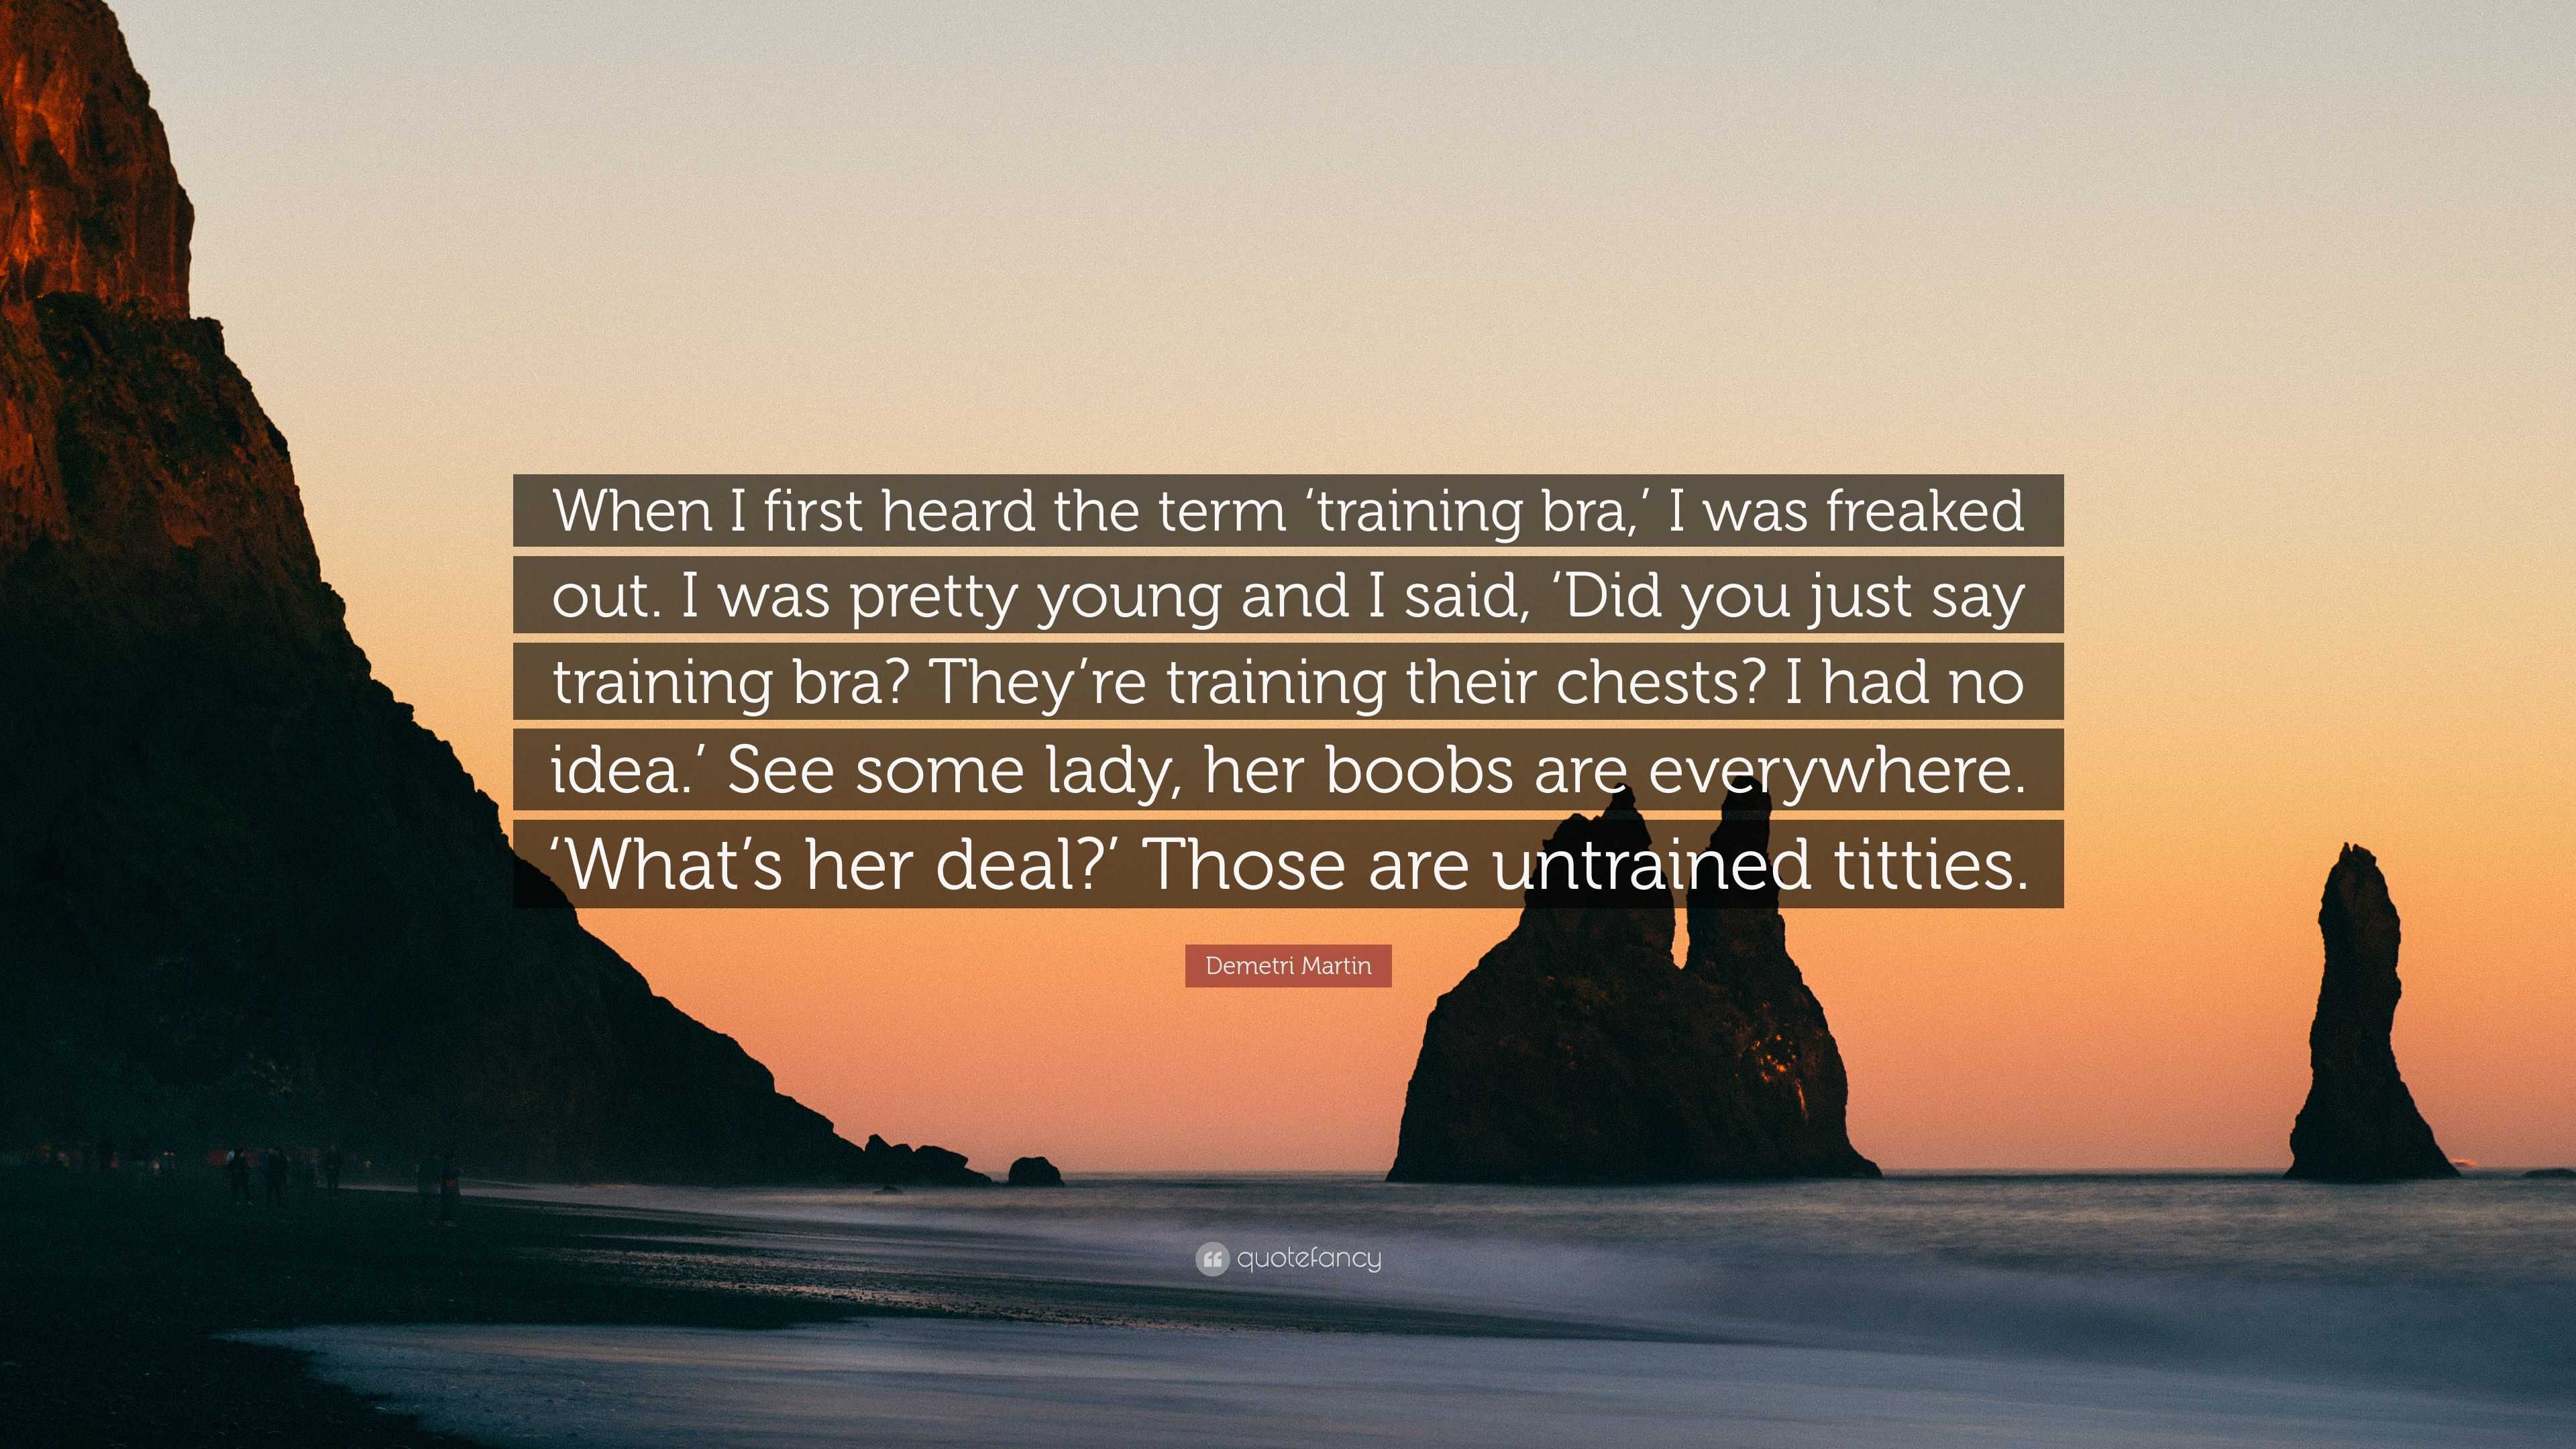 Demetri Martin Quote: “When I first heard the term 'training bra,' I was  freaked out. I was pretty young and I said, 'Did you just say training”